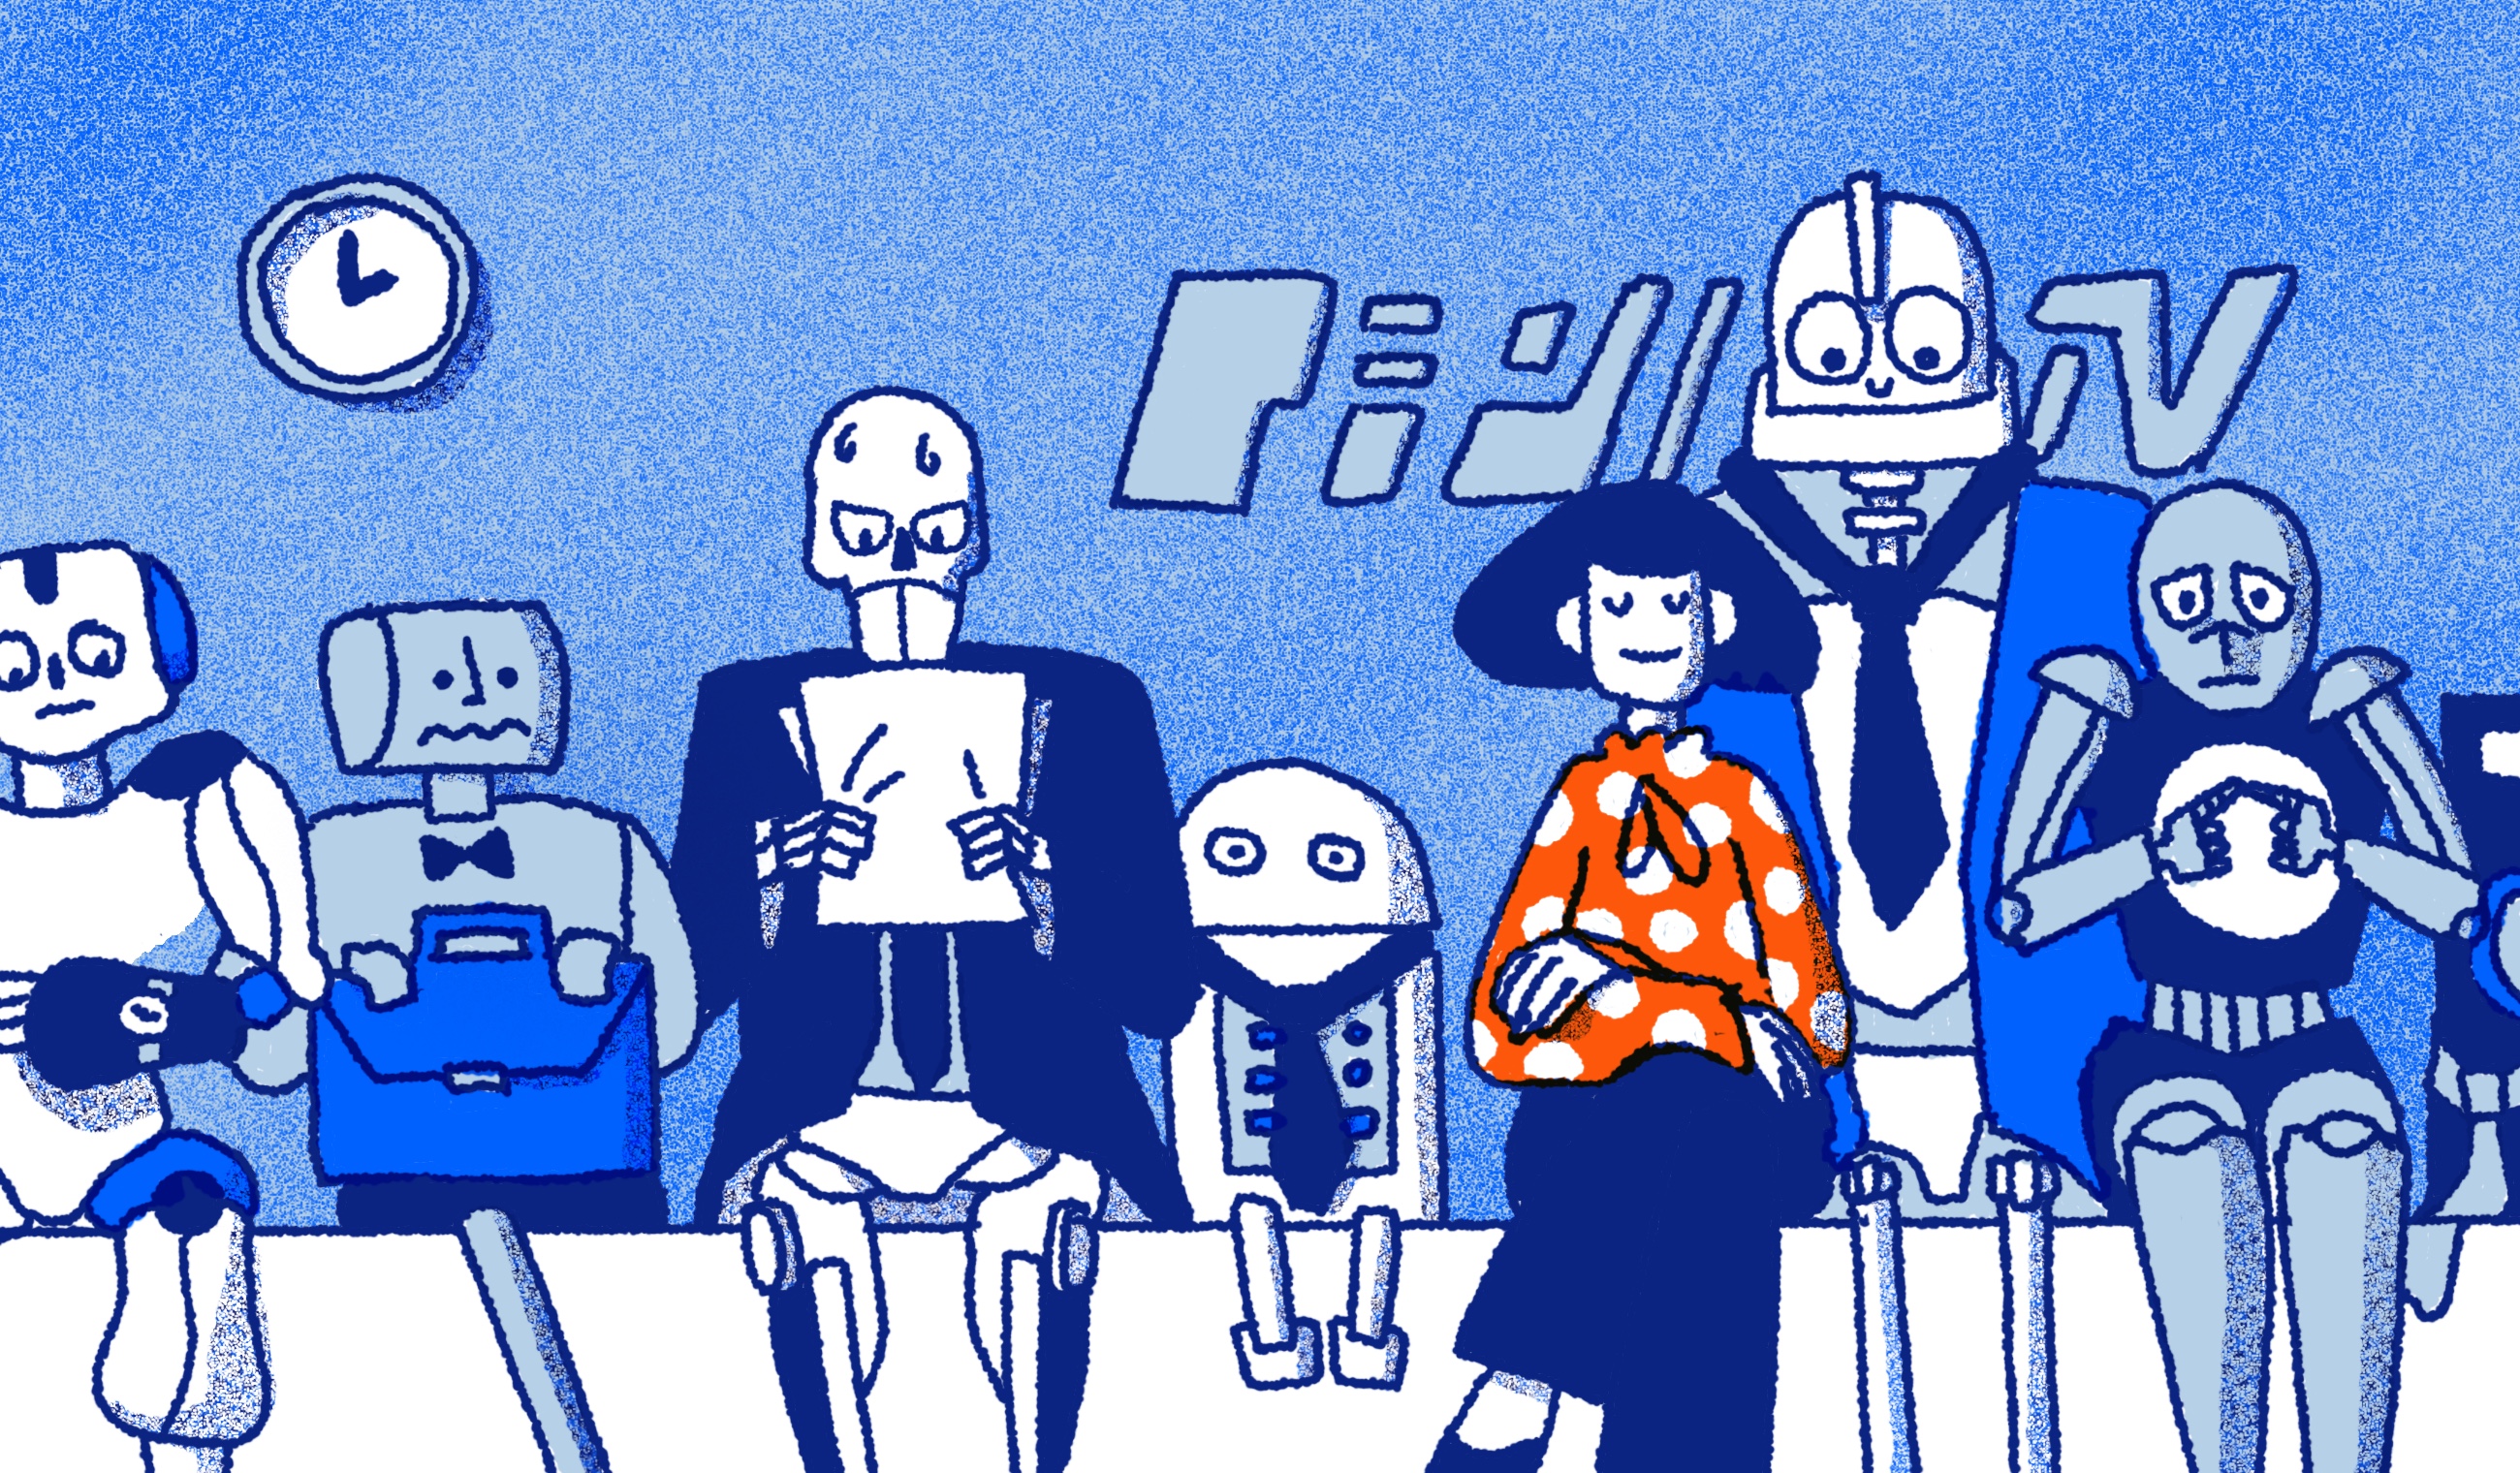 Illustration for post on robots, AI and the future of work